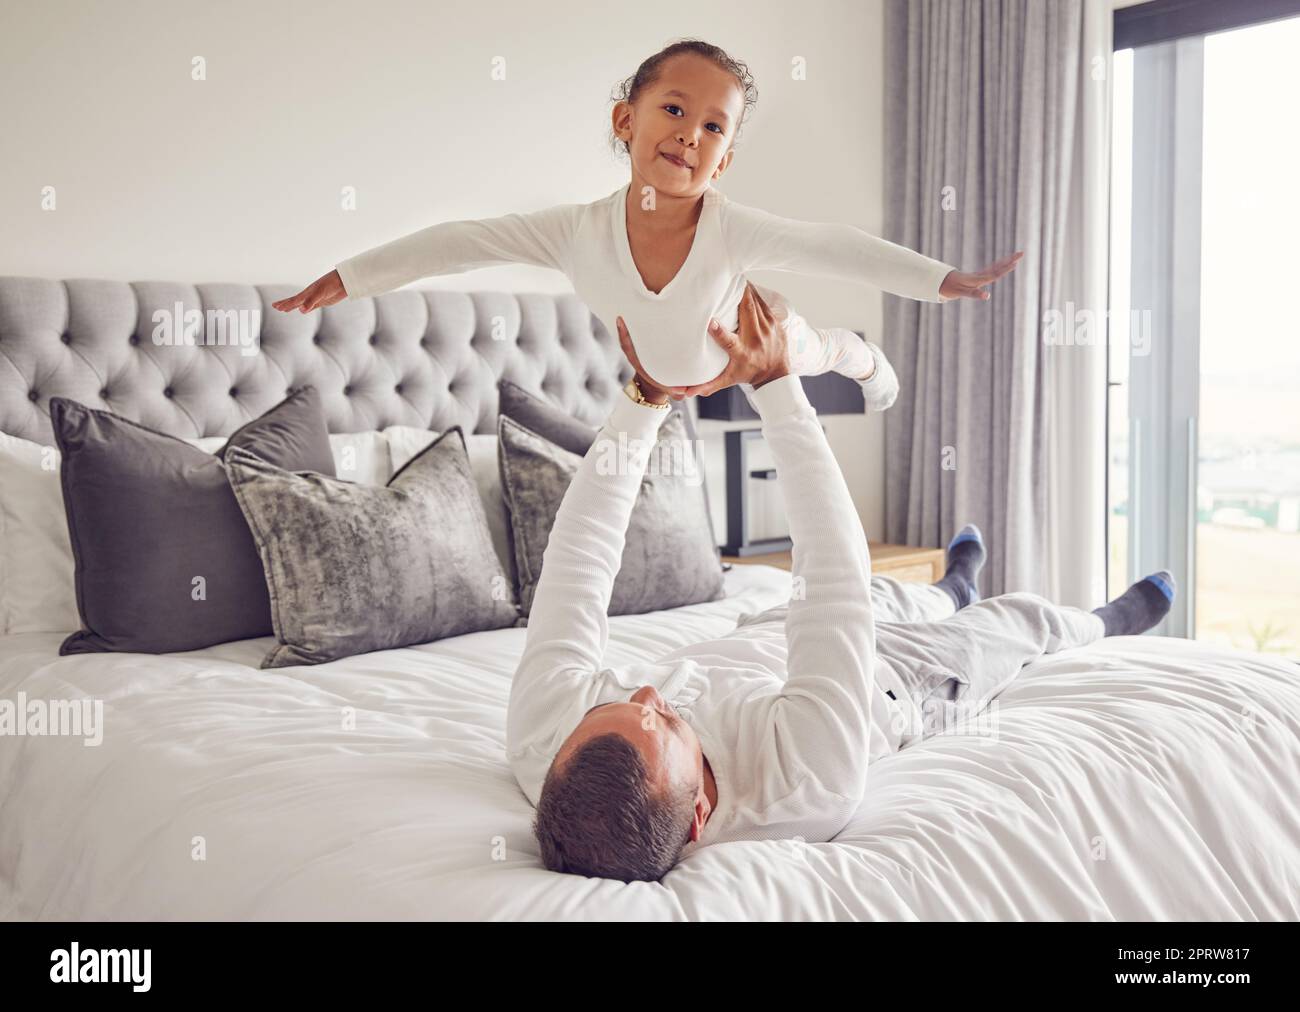 Father lifting child in air on bed, playing and bonding in bedroom of house. Love portrait, care and trust of male parent holding happy kid up in house spending free time together having fun at home. Stock Photo